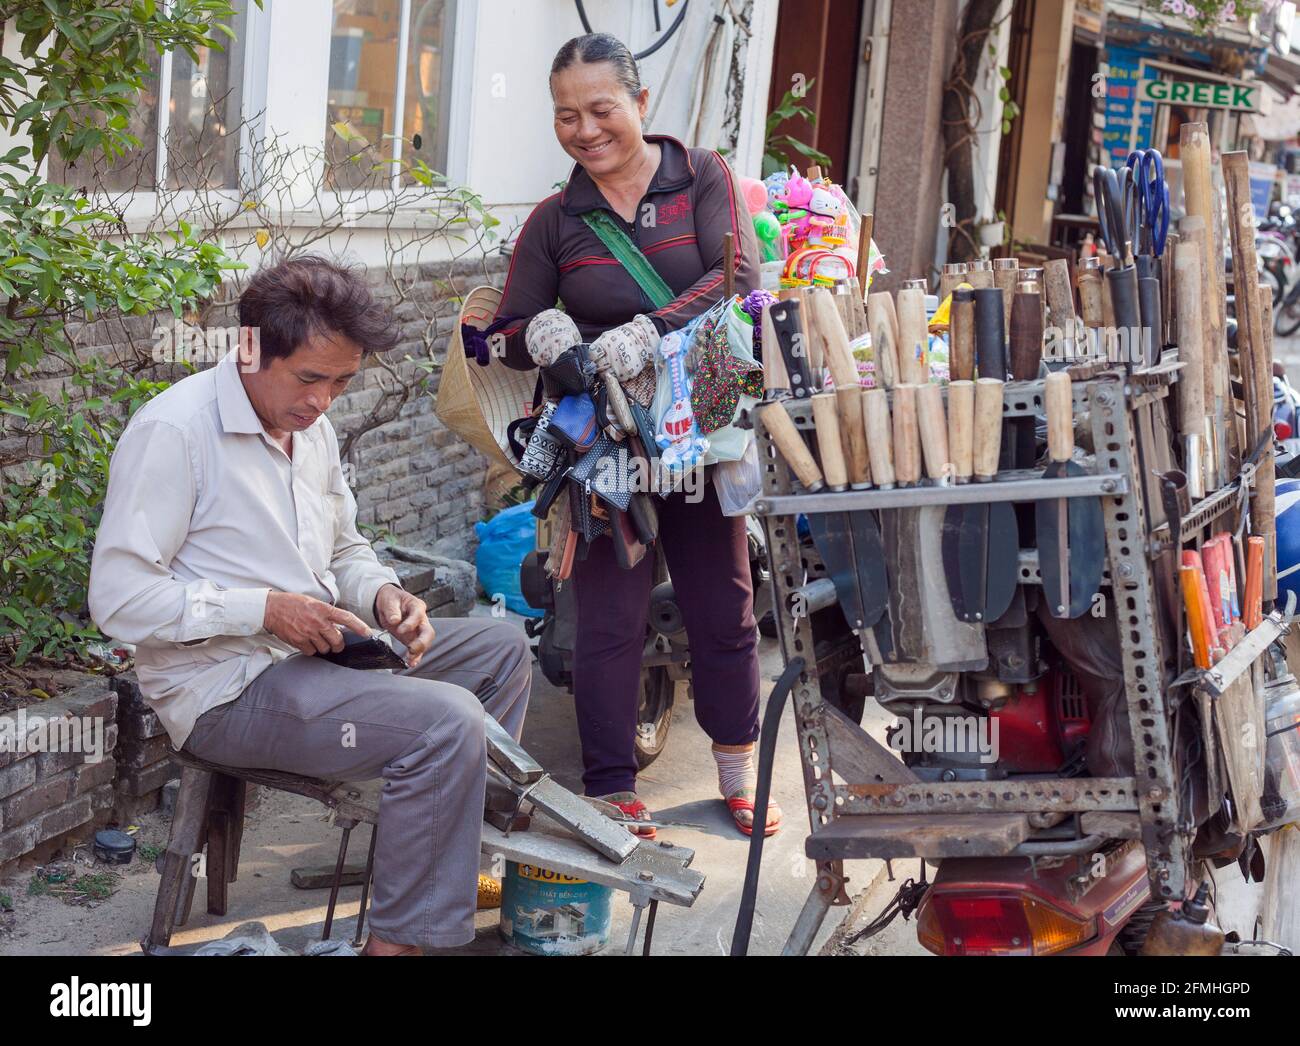 Vietnamese handyman with motorbike full of tools and equipment sits roadside working, Hoi An, Vietnam Stock Photo